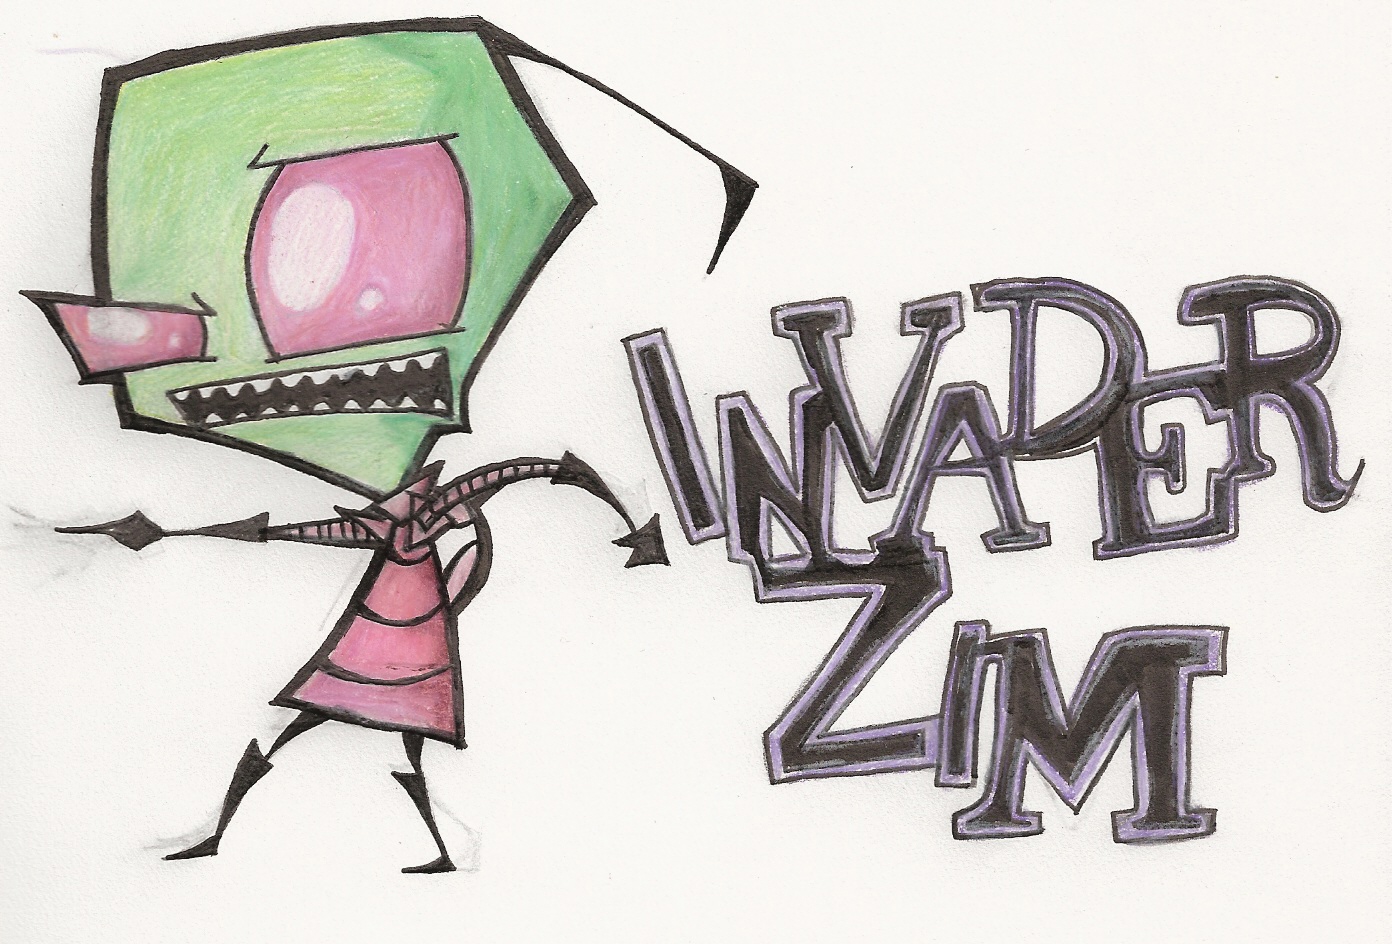 Tis' be the Zim *woot woot* by Untalentedsamy13